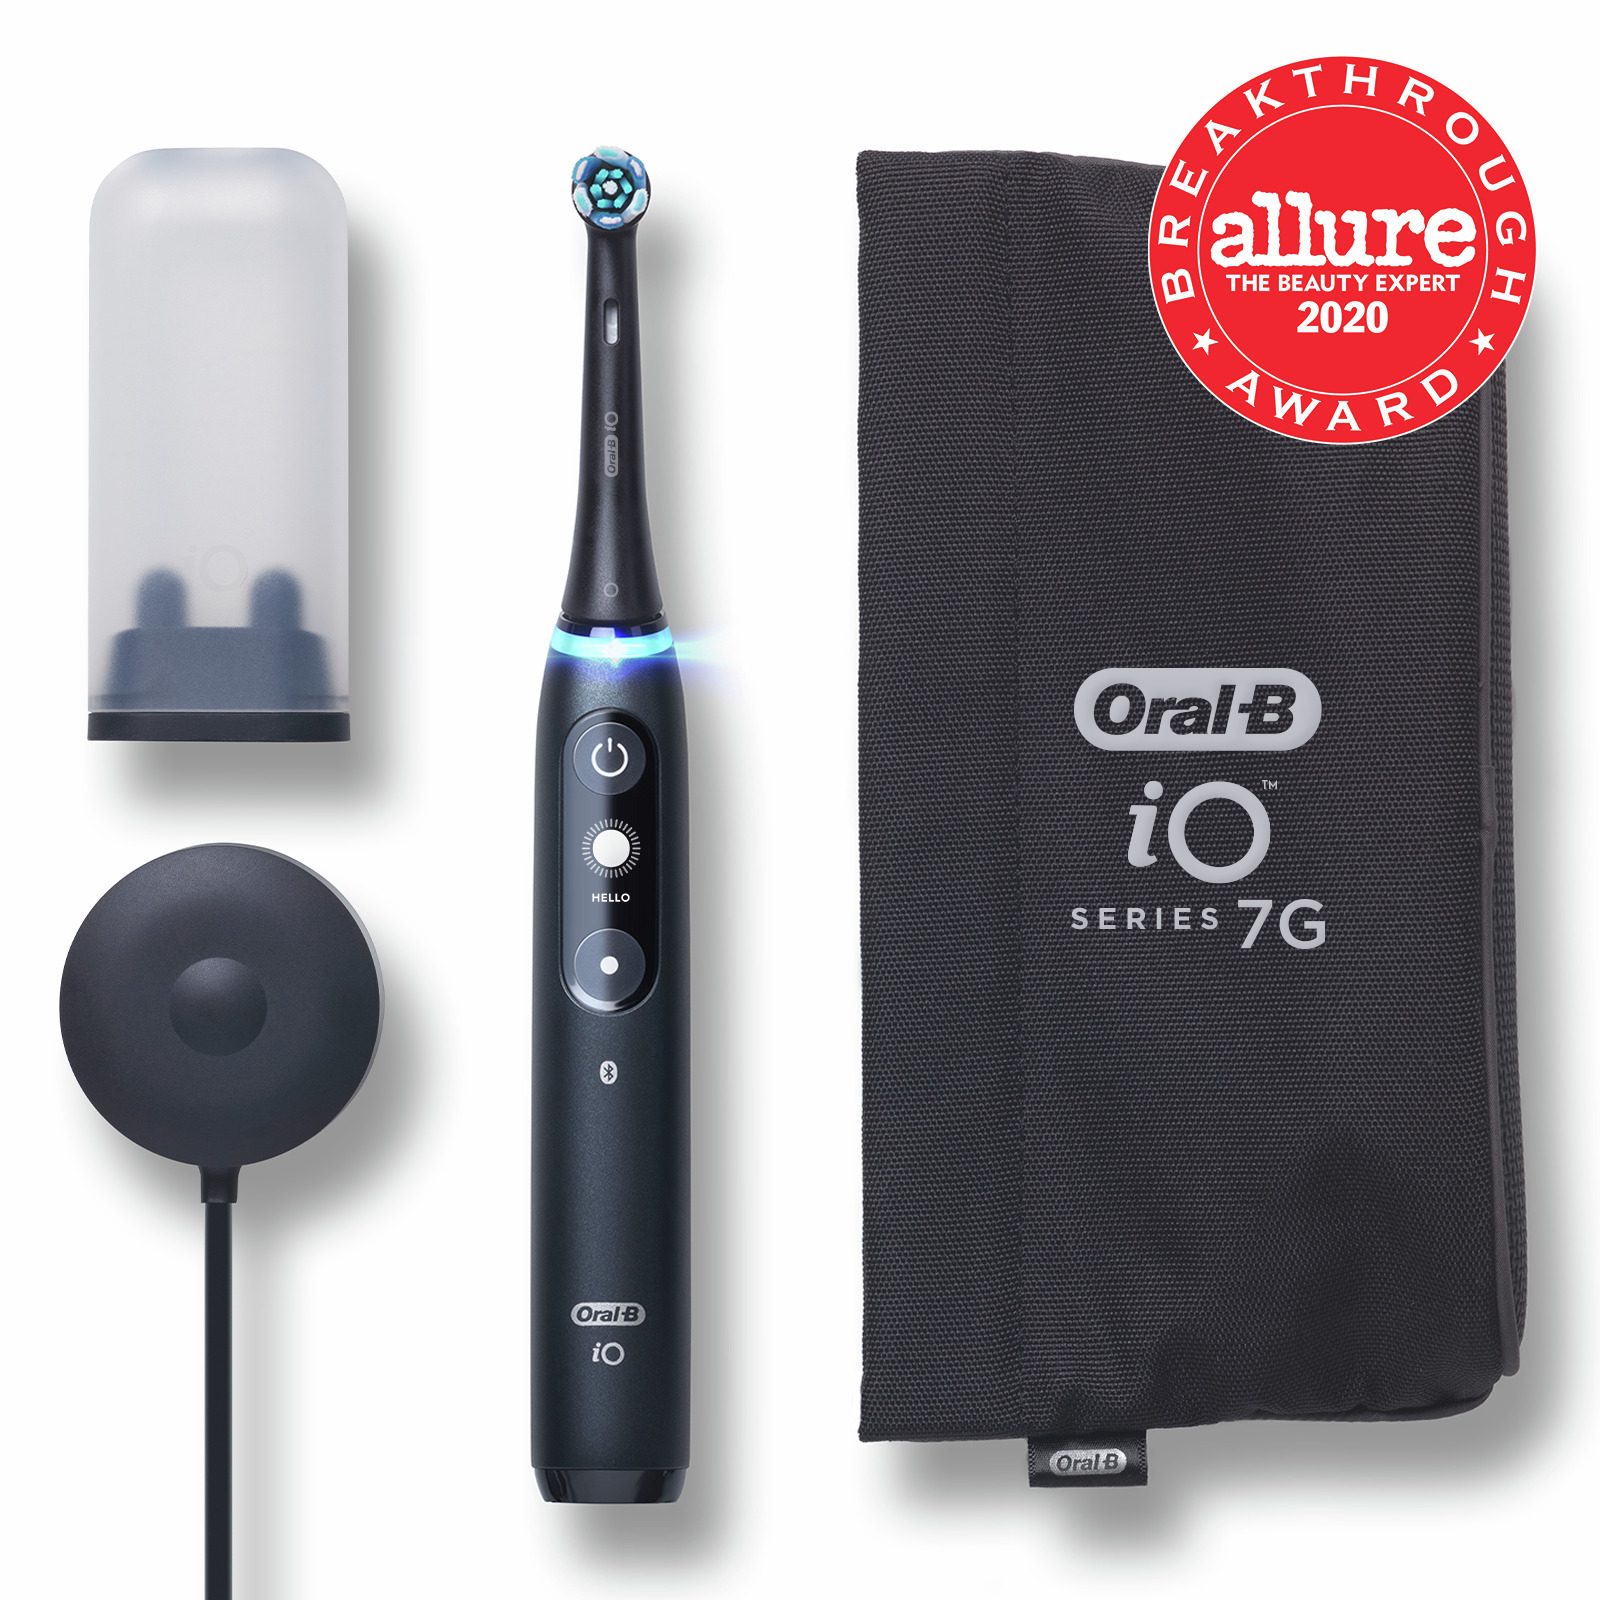 Oral-B iO Series 7G Electric Toothbrush with 1 Brush Head, Black Onyx - image 1 of 10